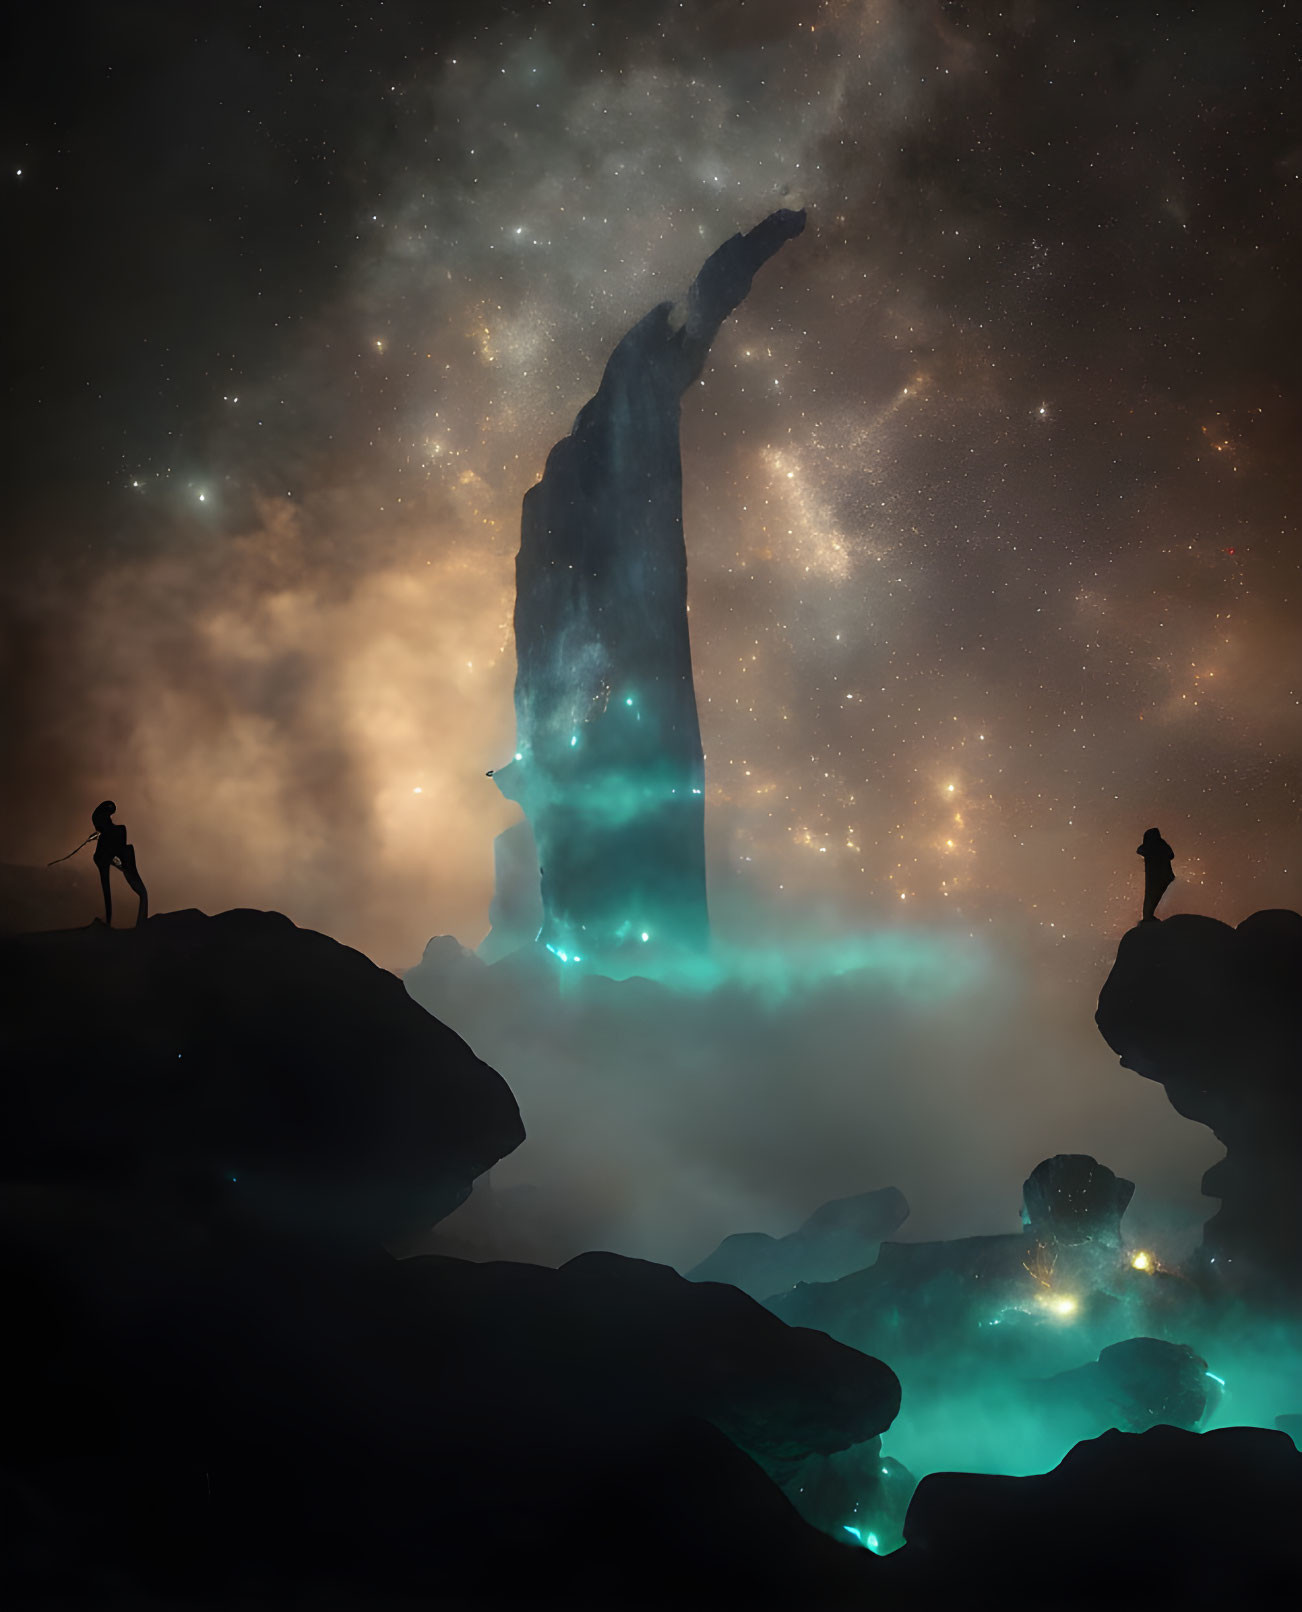 Silhouetted figures on rocks near towering monolith in glowing mist